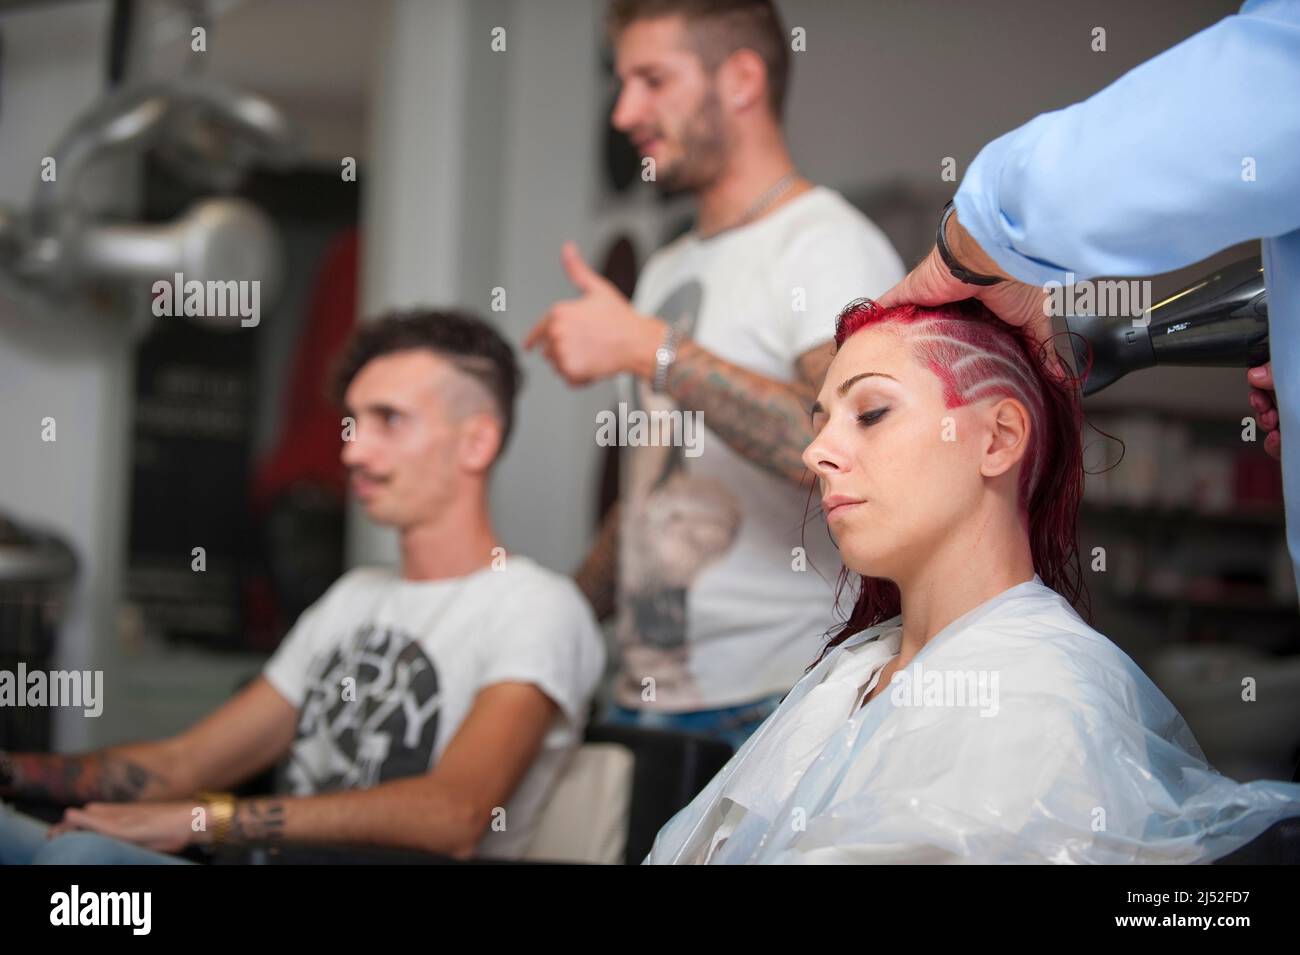 Hairstylist working on a red haircut Stock Photo